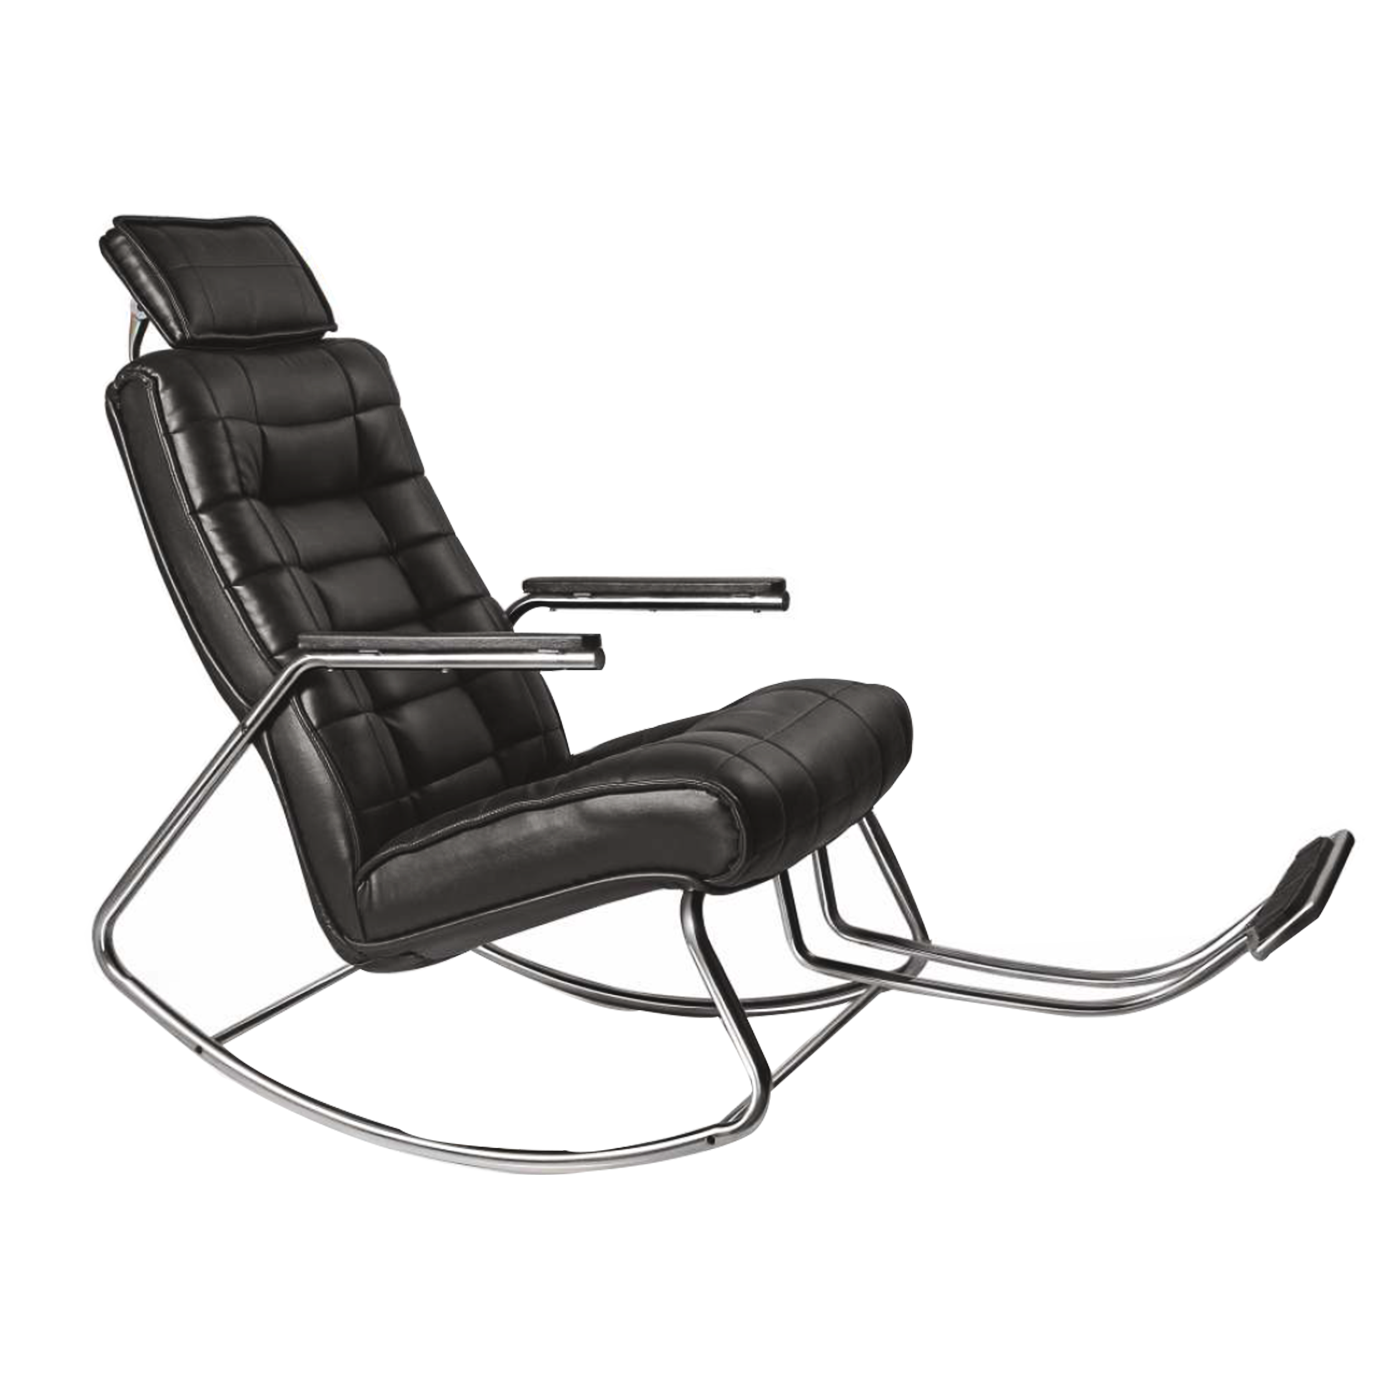 Detec™ Rocking Chair with hand rest and Foot rest crome frame in black color